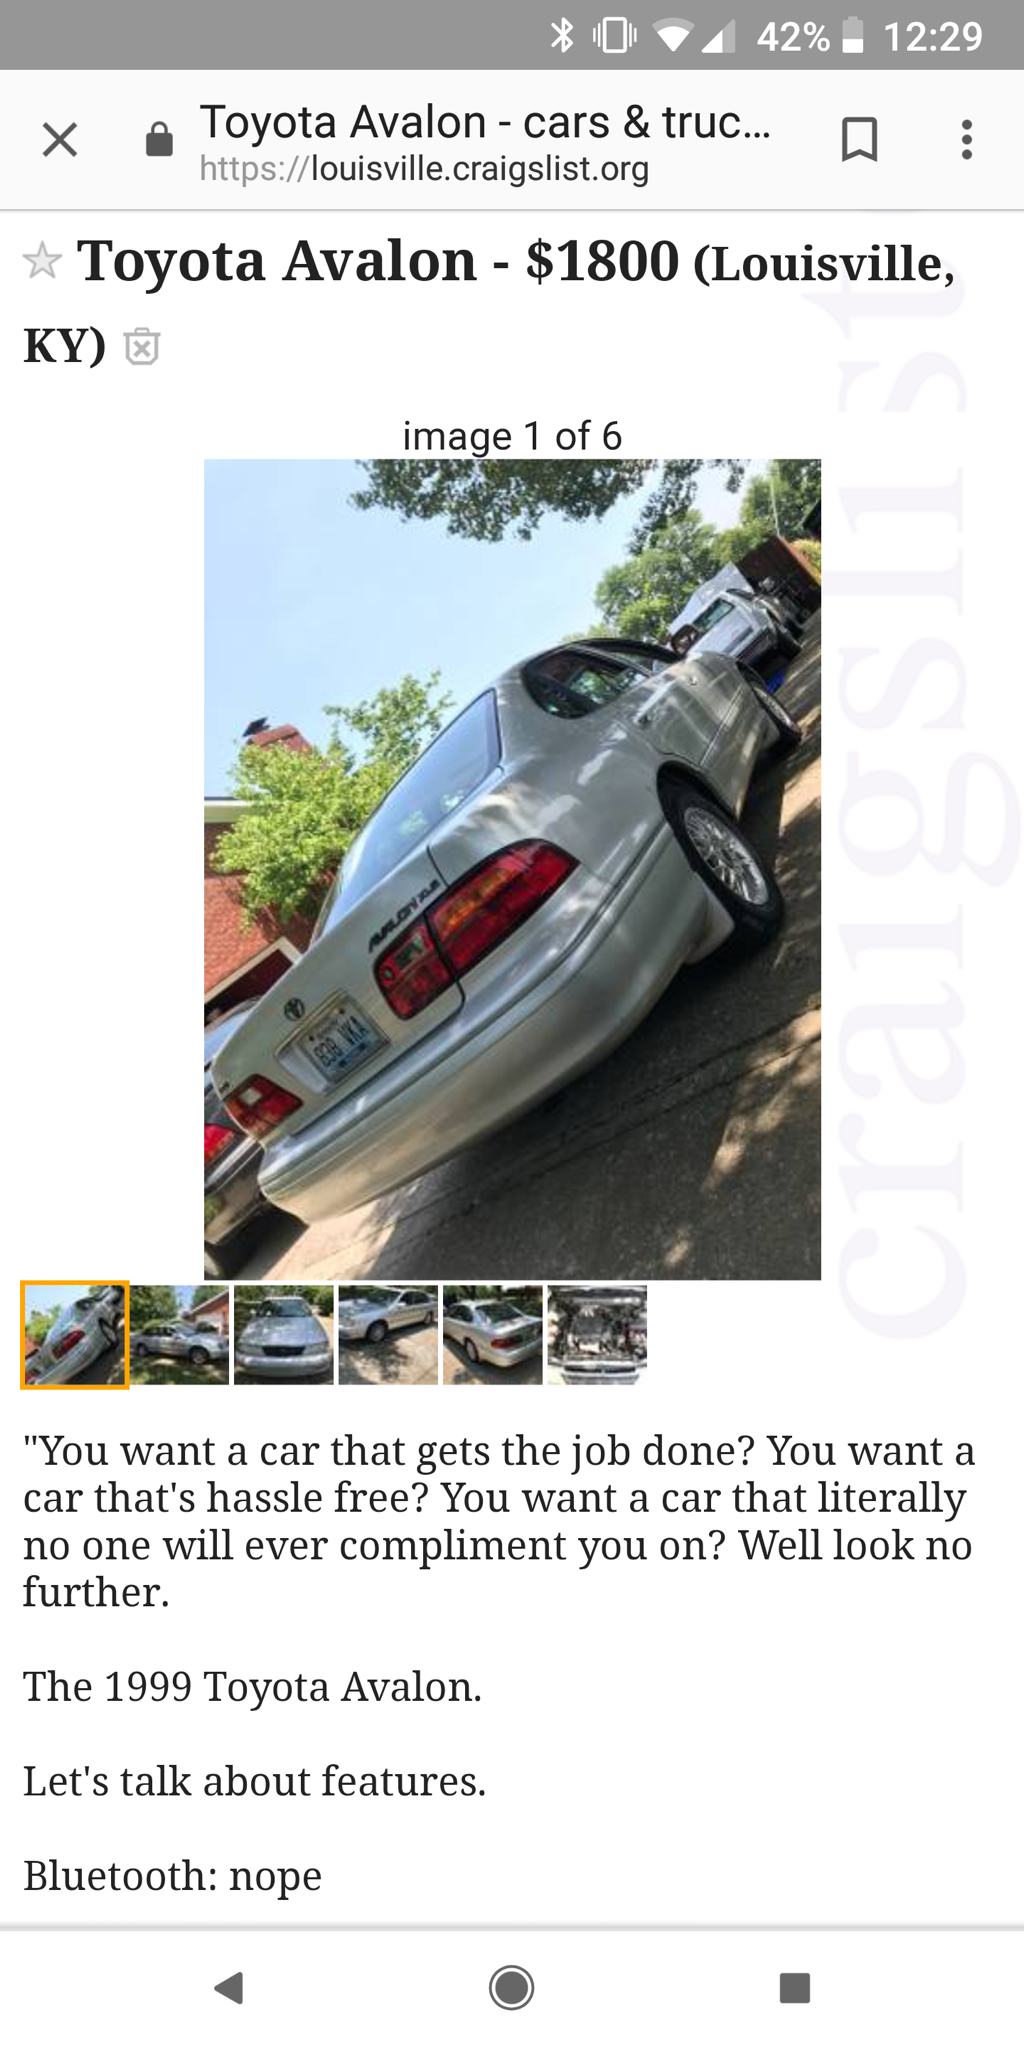 This Craigslist Ad For A Toyota Avalon Doesn't Care What ...